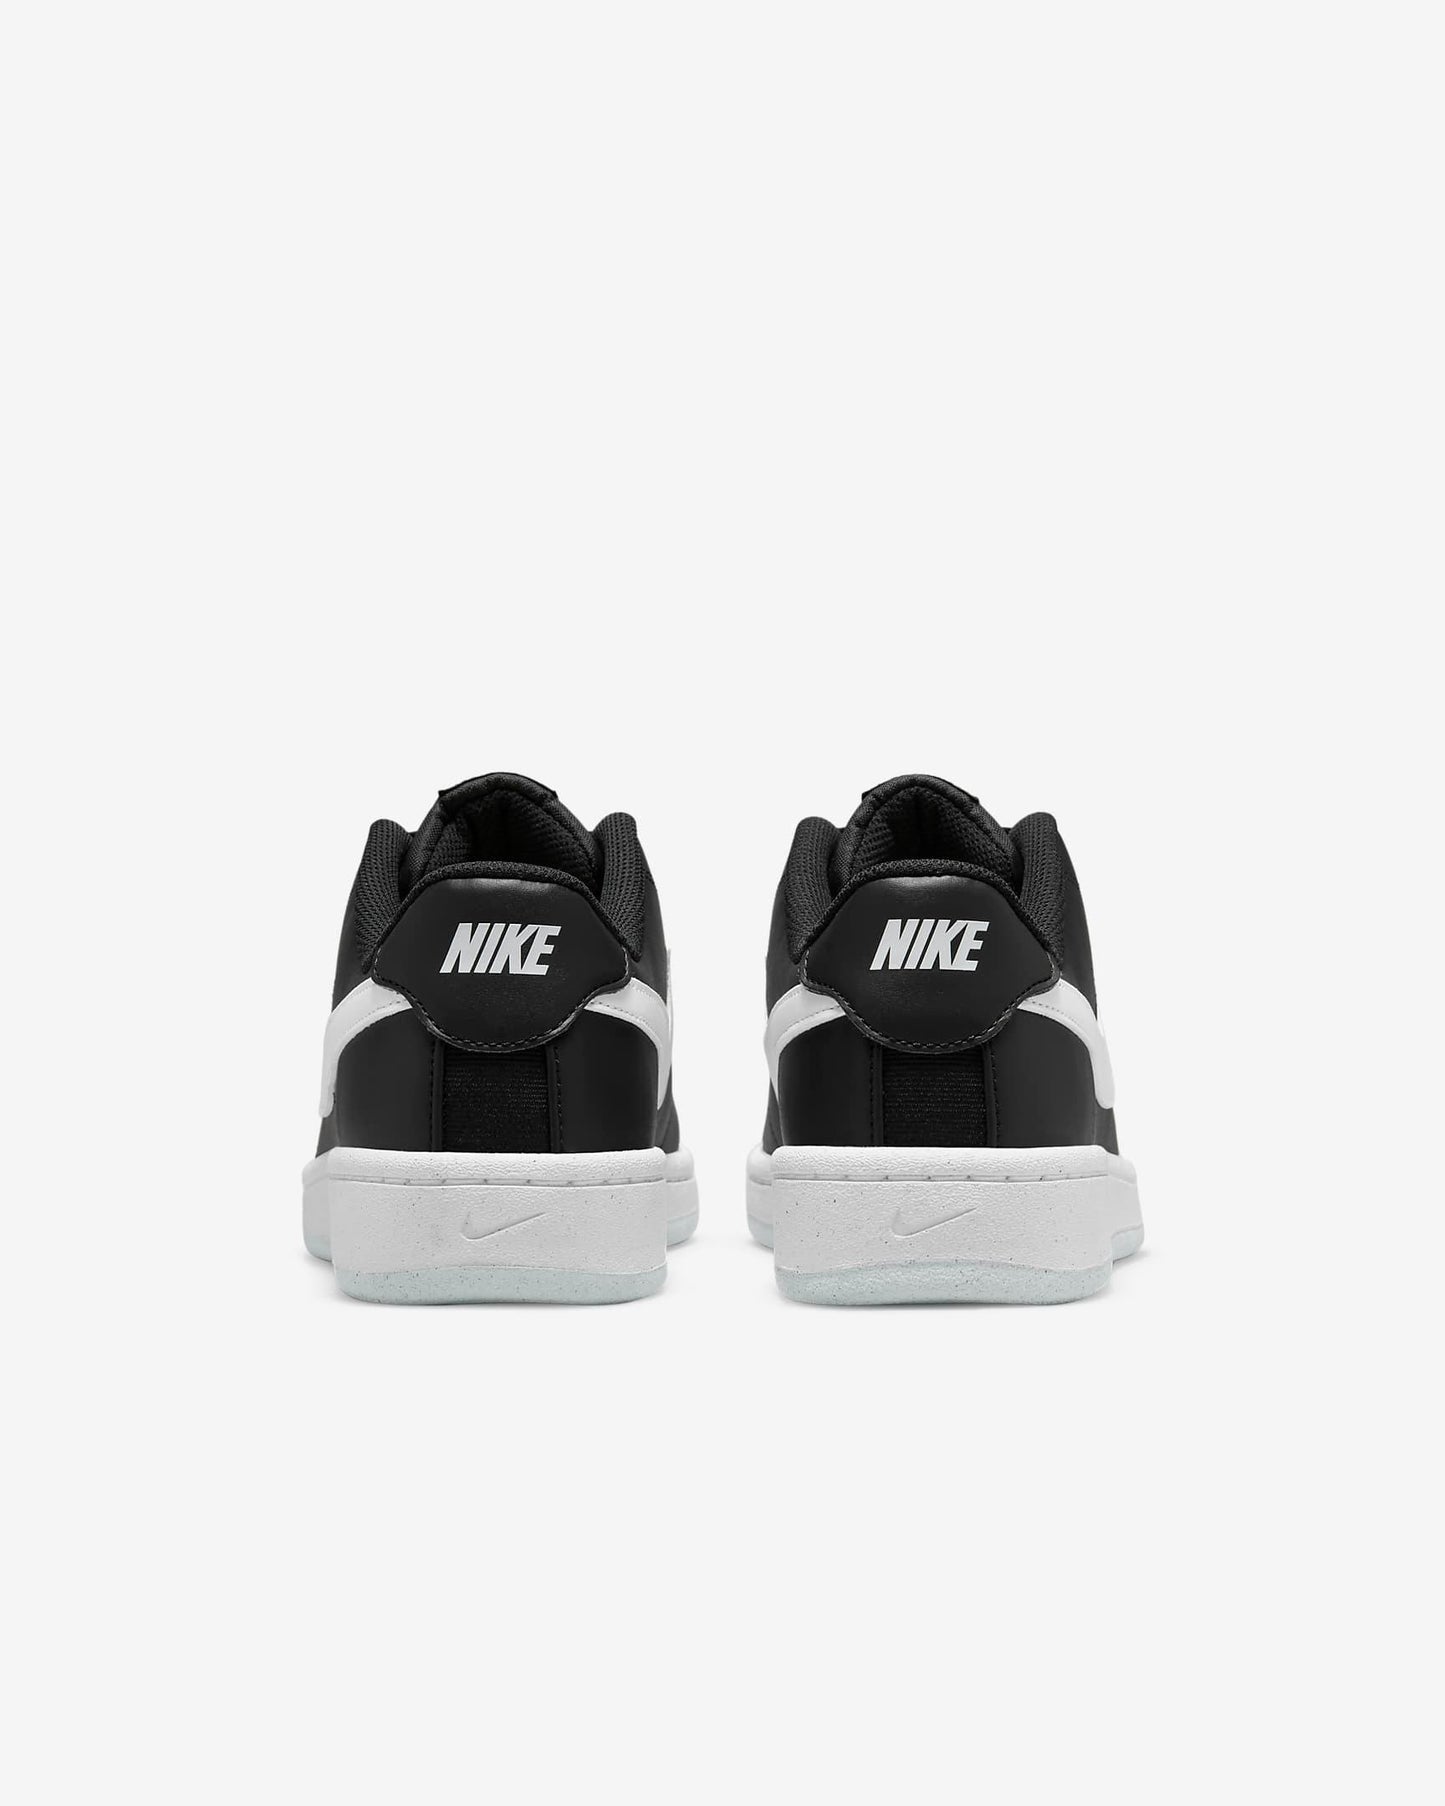 NIKE COURT ROYALE 2 NN SHOES - BLACK DH3160-001 Activ Abou Alaa